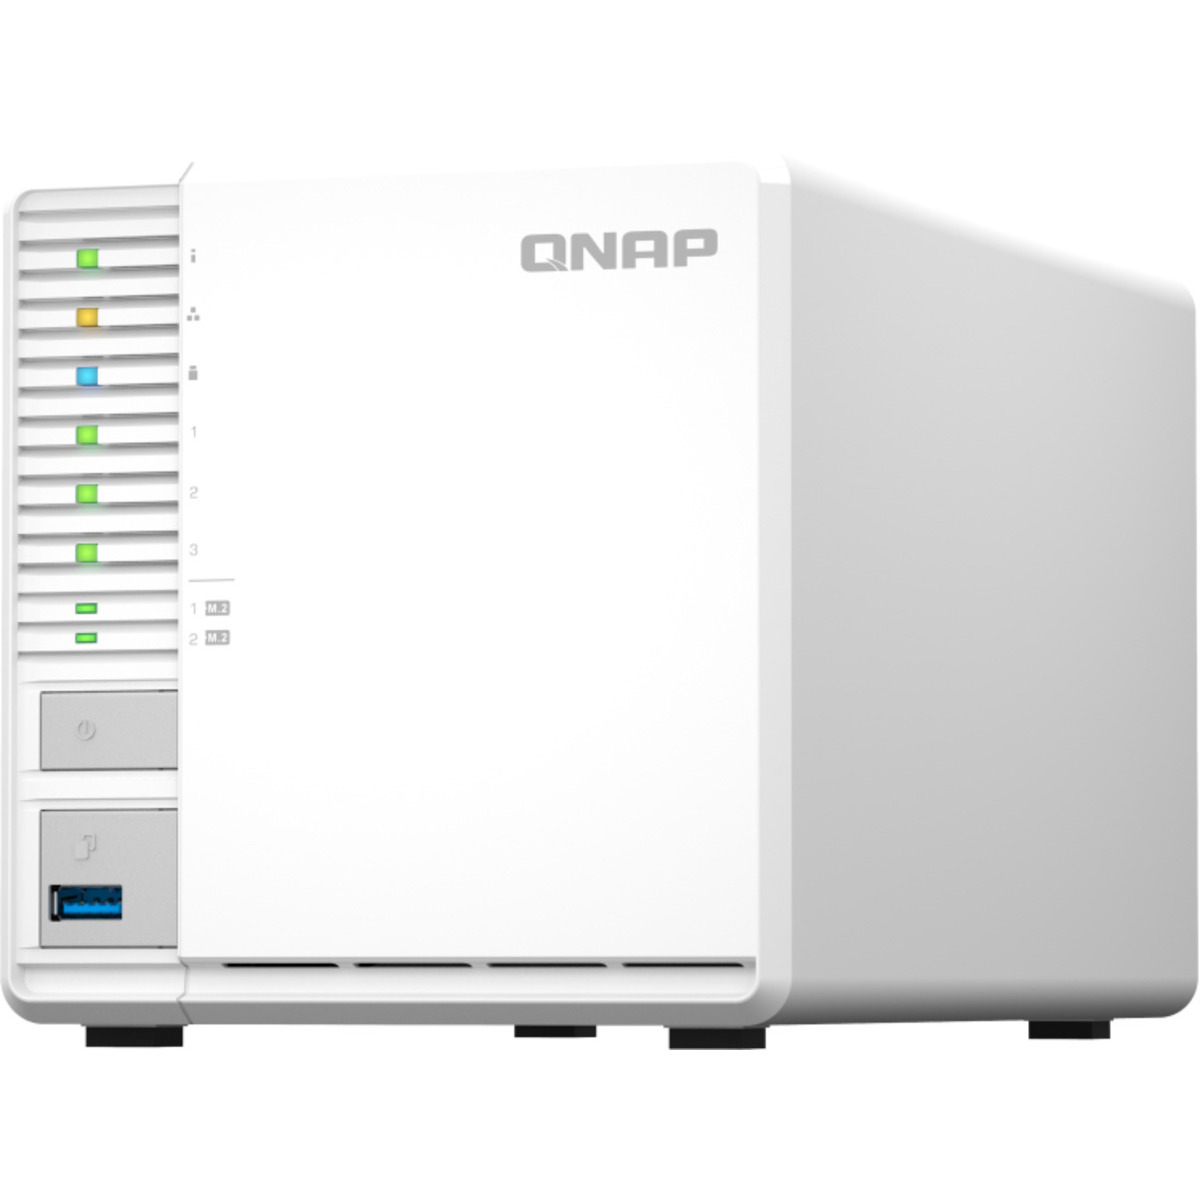 buy $1425 QNAP TS-364 6tb Desktop NAS - Network Attached Storage Device 3x2000gb Western Digital Red SA500 WDS200T1R0A 2.5 560/530MB/s SATA 6Gb/s SSD NAS Class Drives Installed - Burn-In Tested - nas headquarters buy network attached storage server device das new raid-5 free shipping usa TS-364